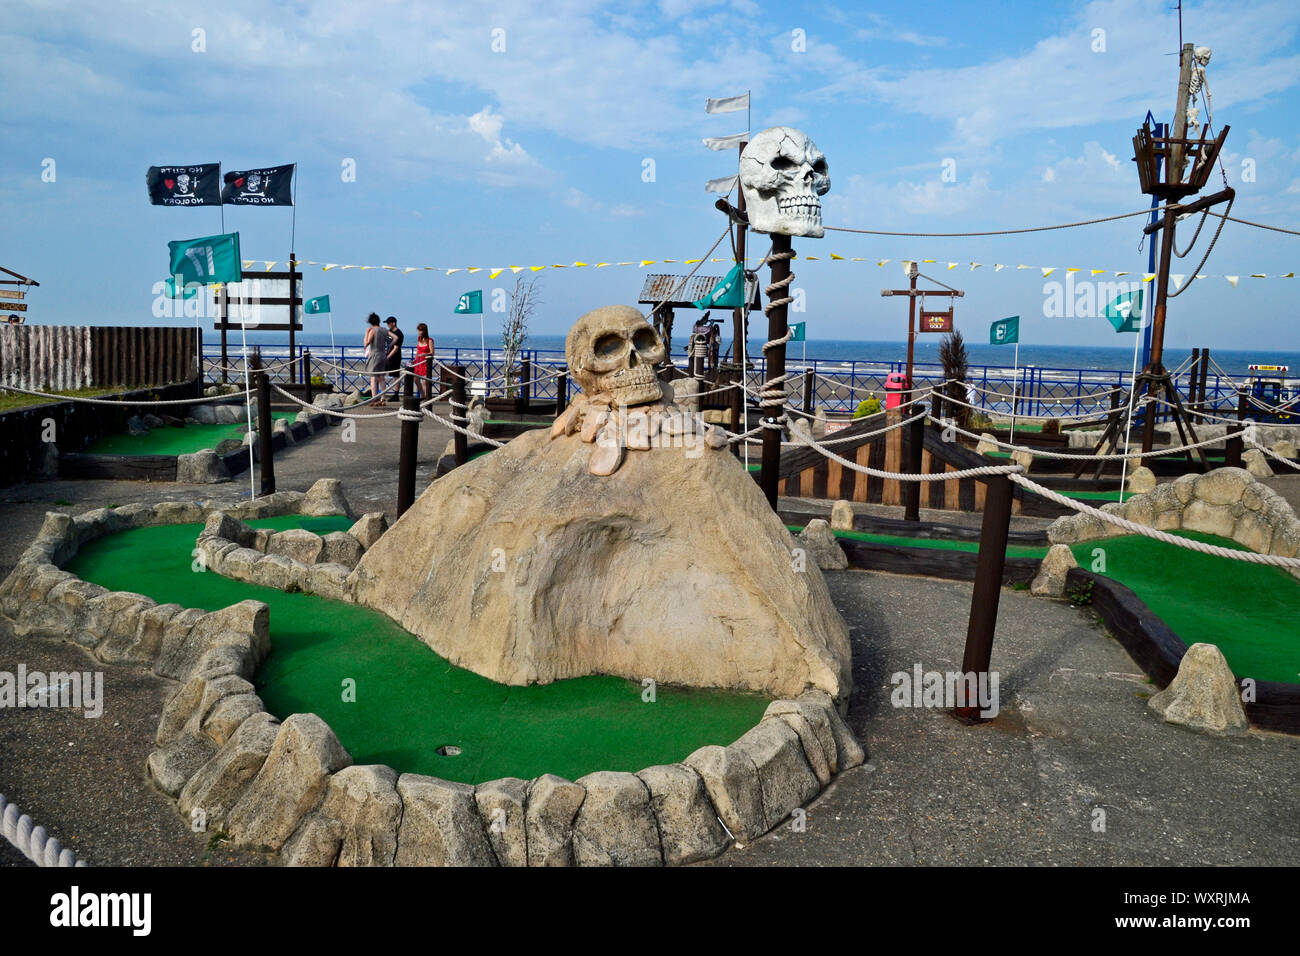 Pirate Golf, Crazy Golf at Mablethorpe, Lincolnshire, UK Stock Photo